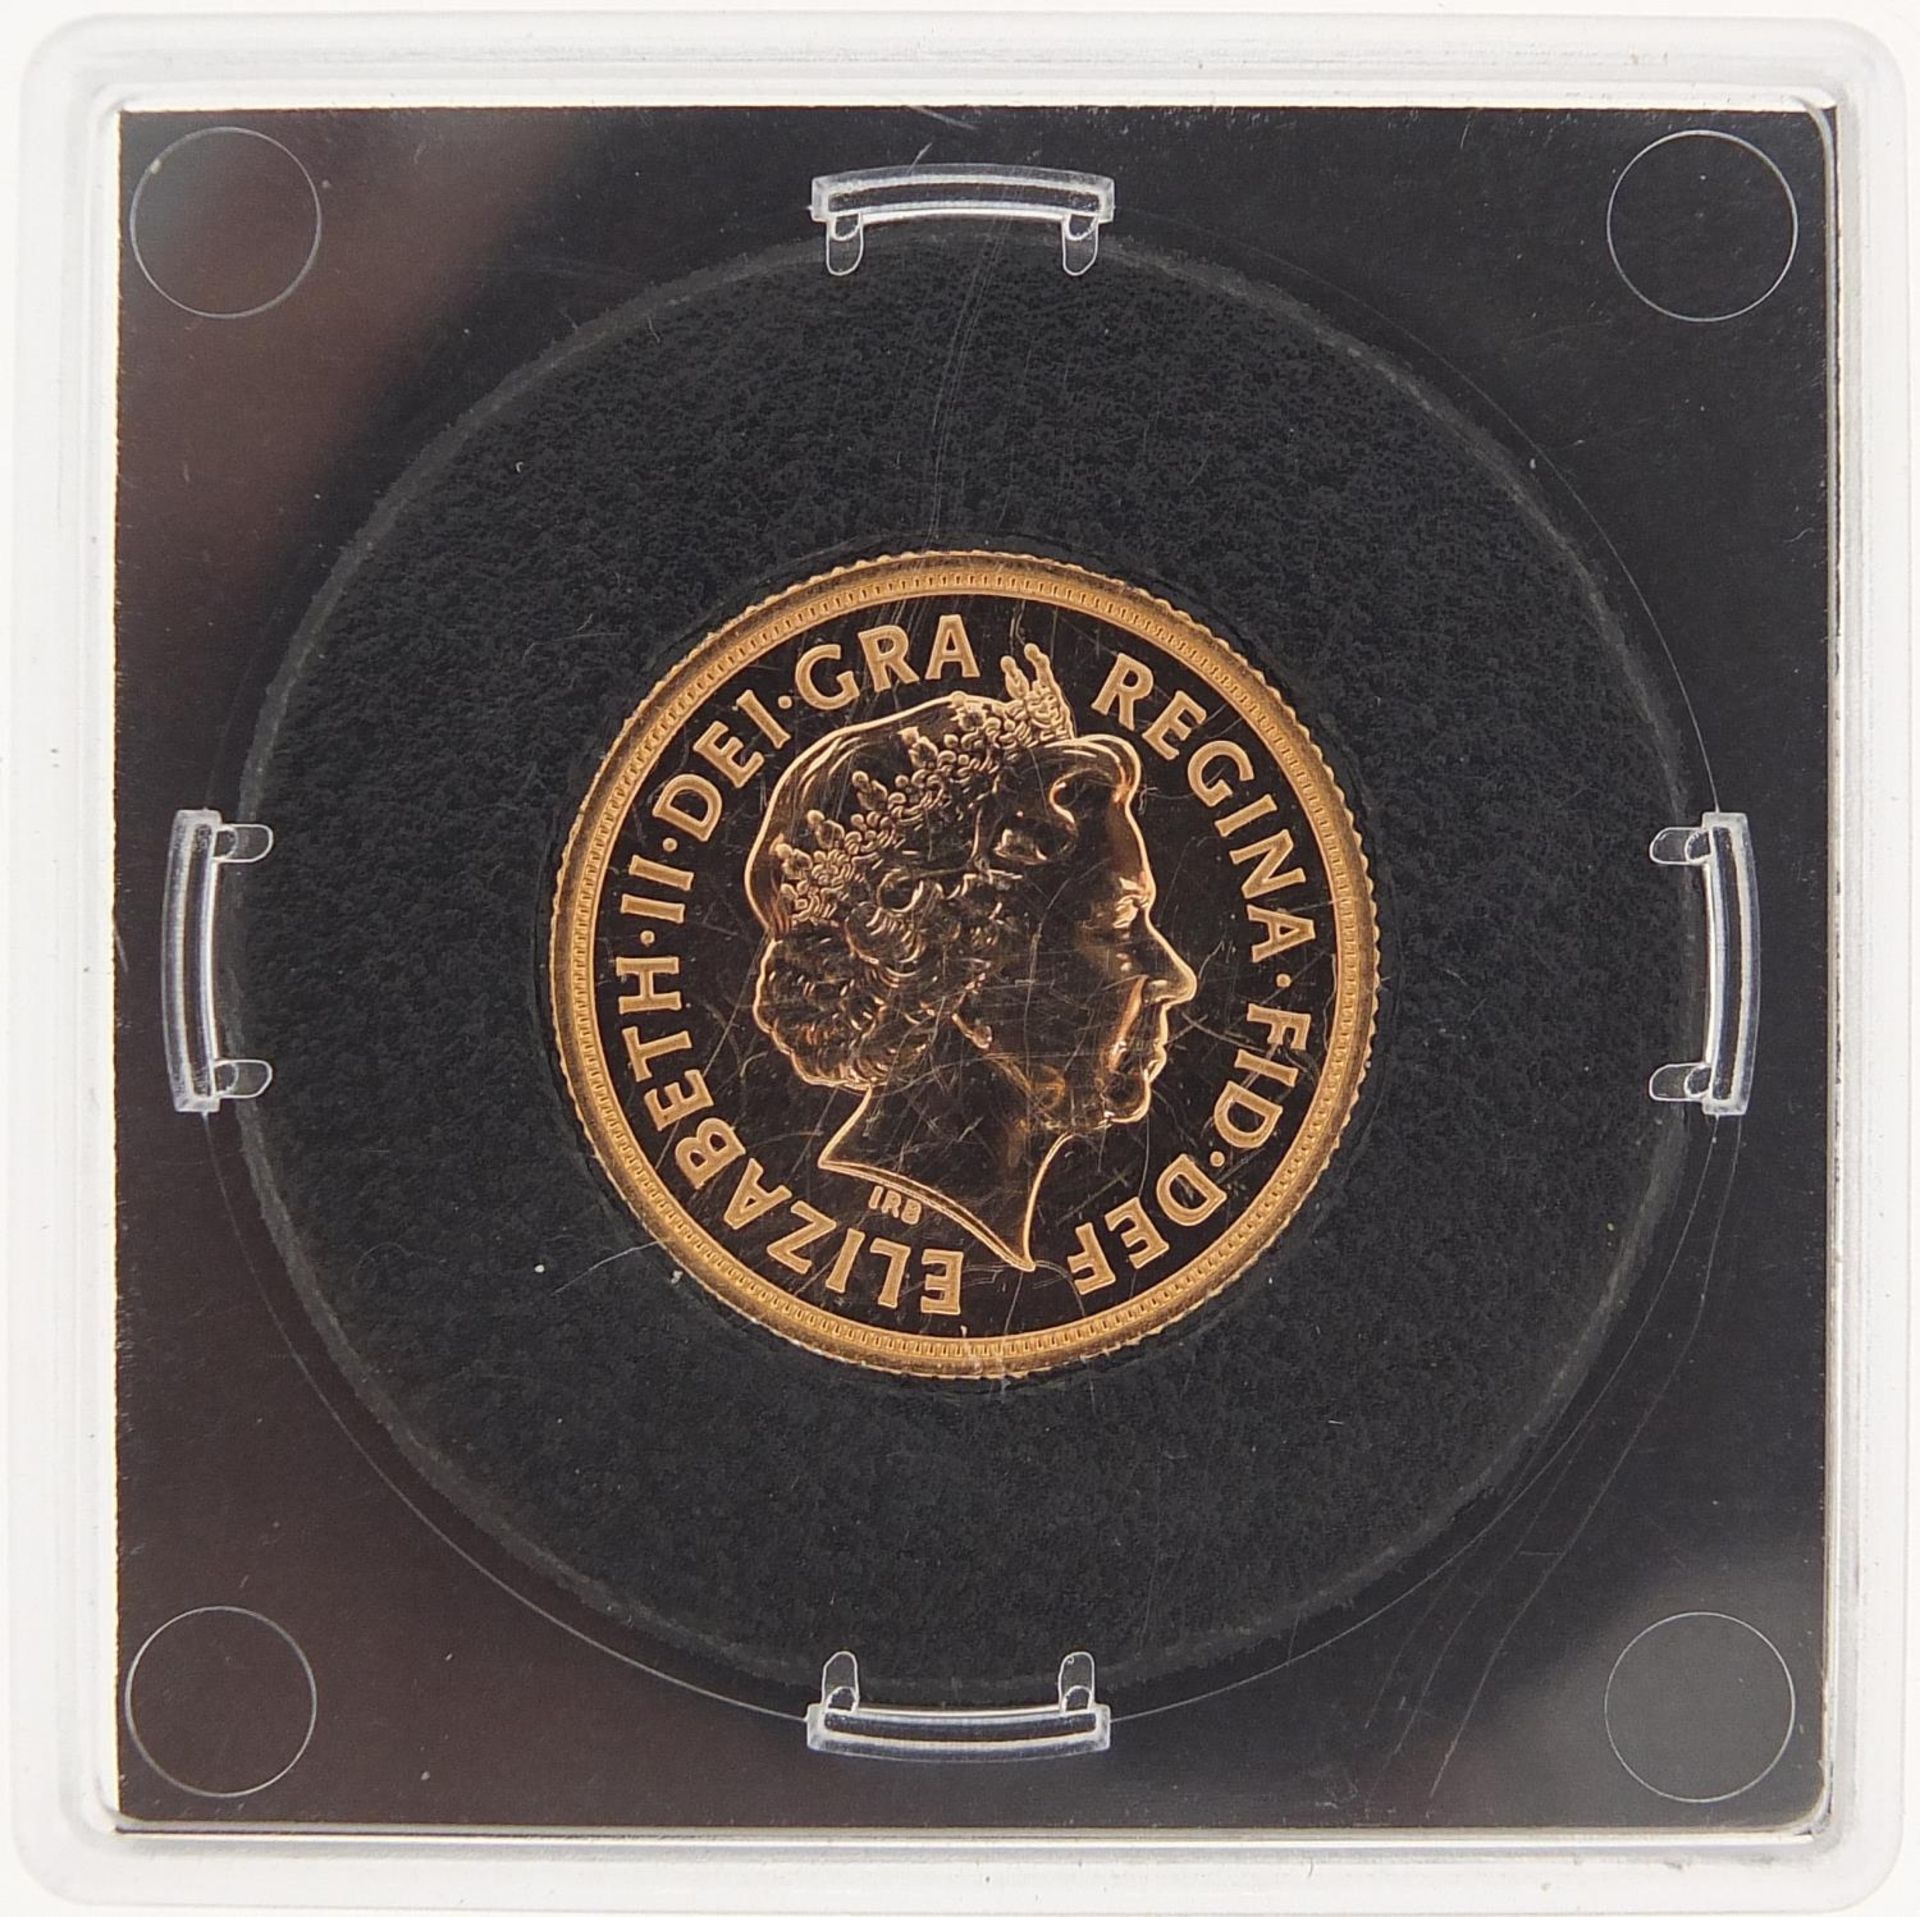 Elizabeth II 2015 gold sovereign housed in portfolio management coin capsule - this lot is sold - Image 4 of 4